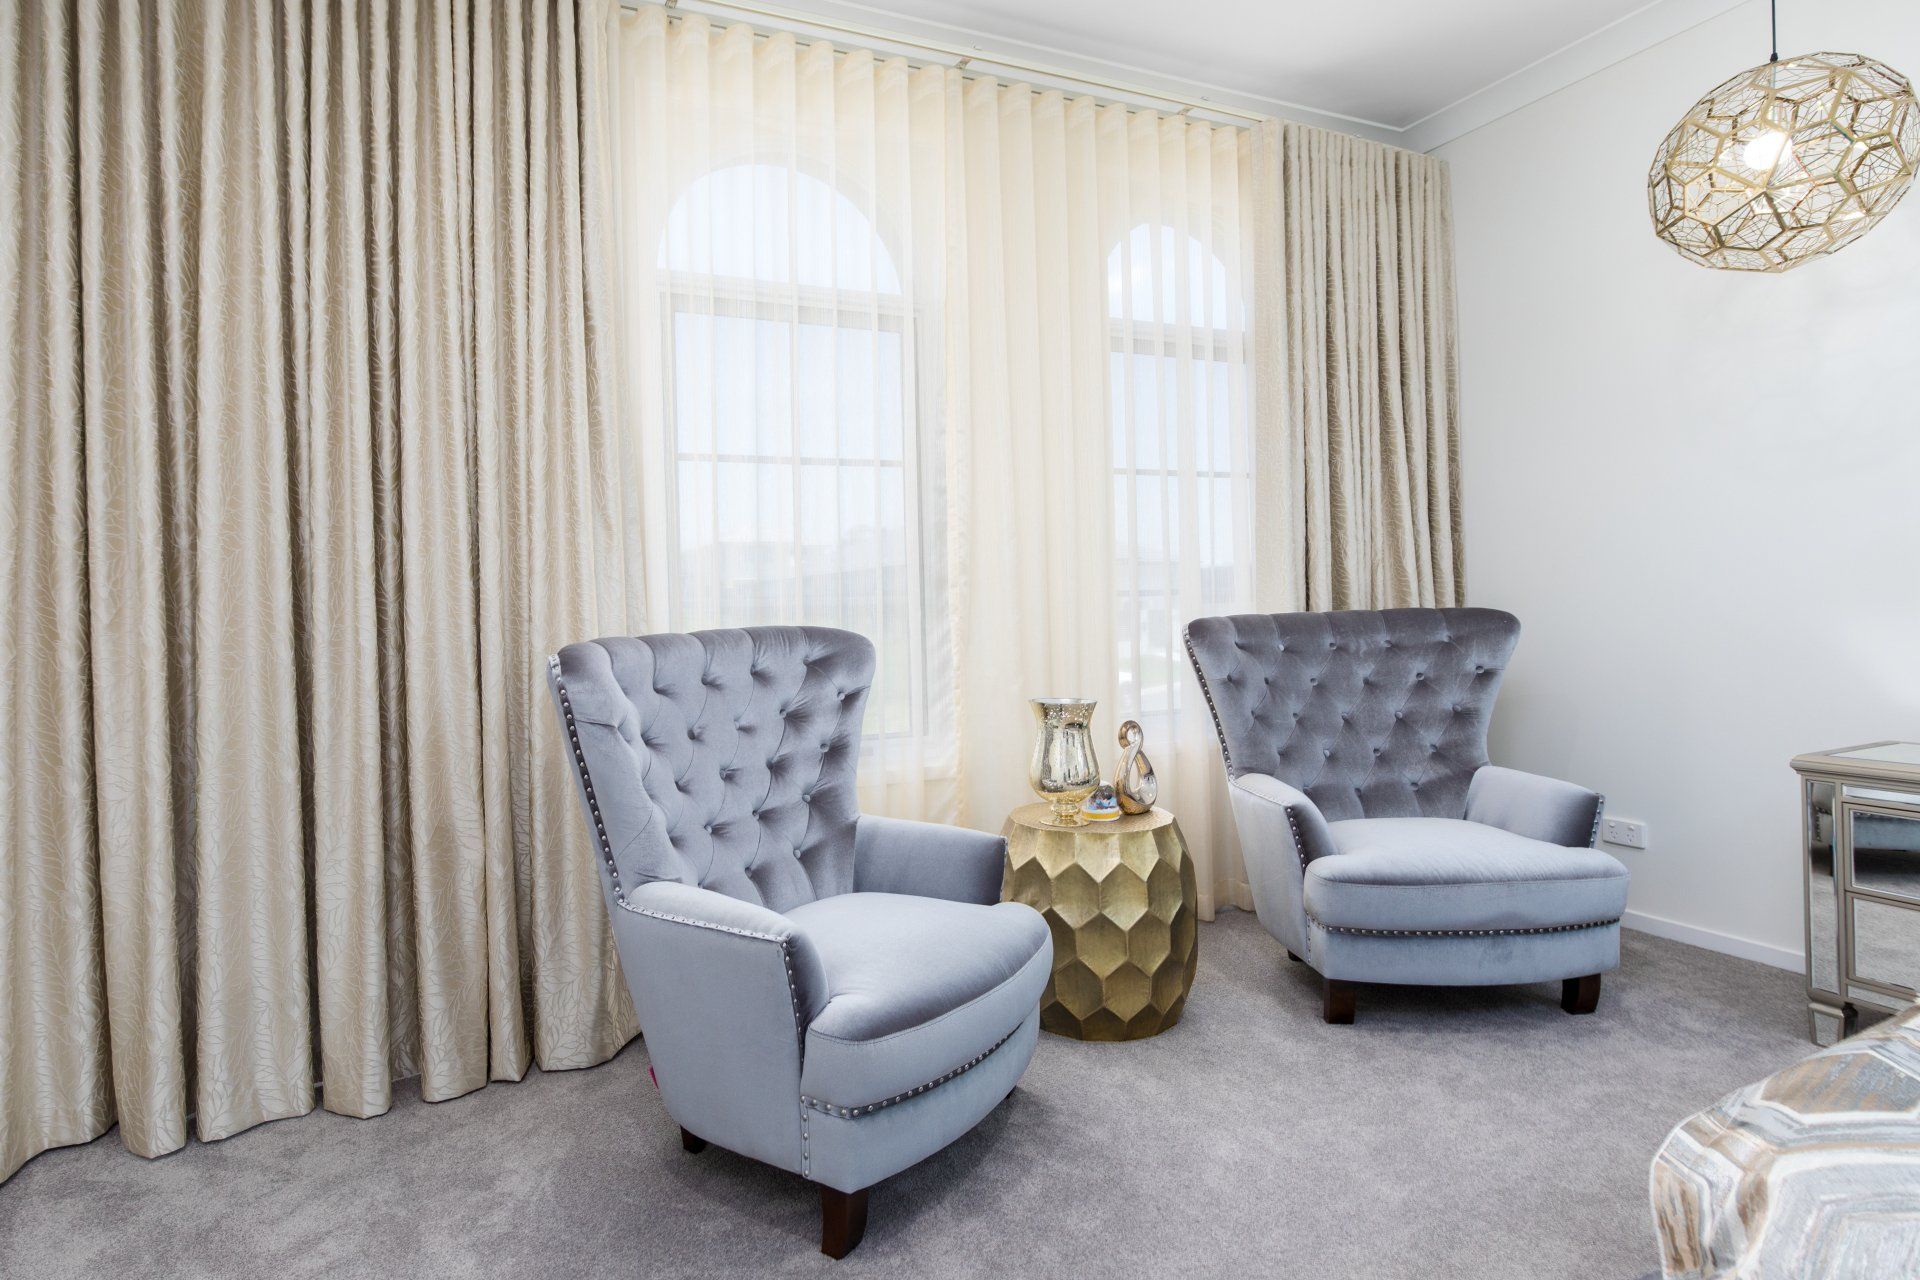 Quality Curtains & Blinds Windsor